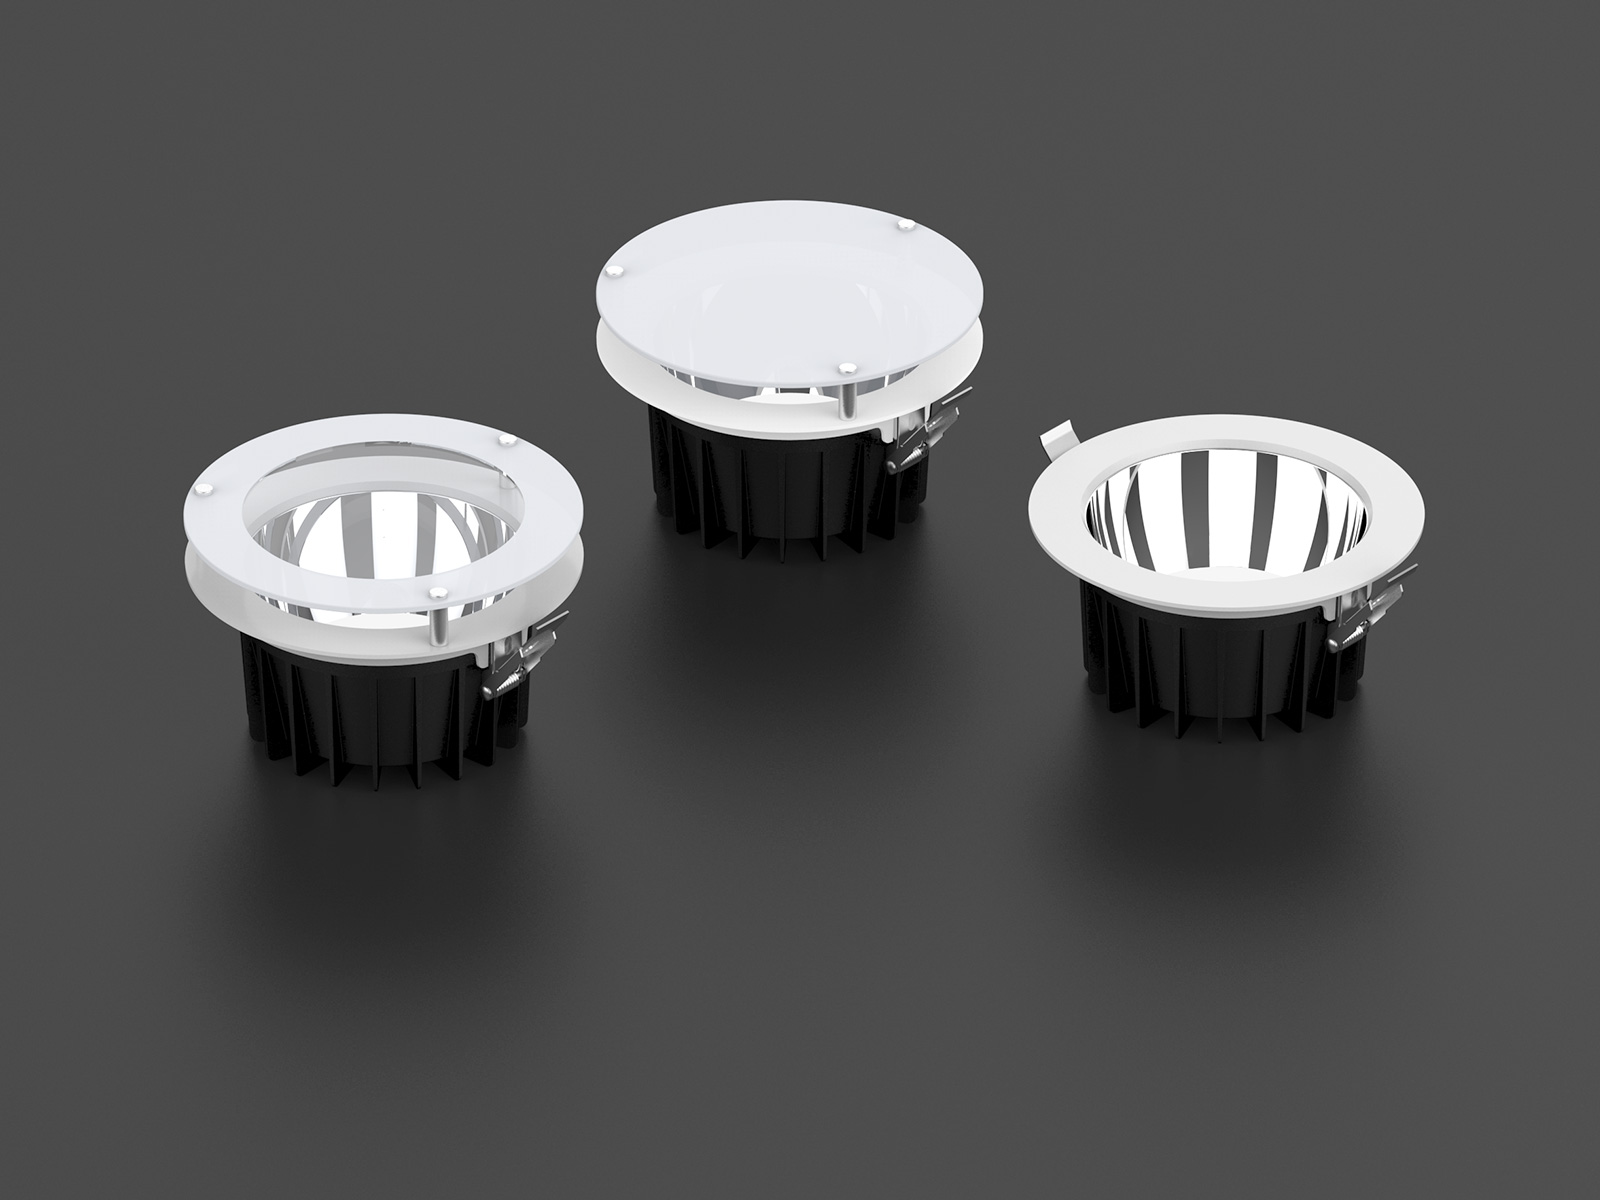 DL179 halo led surface mount downlight